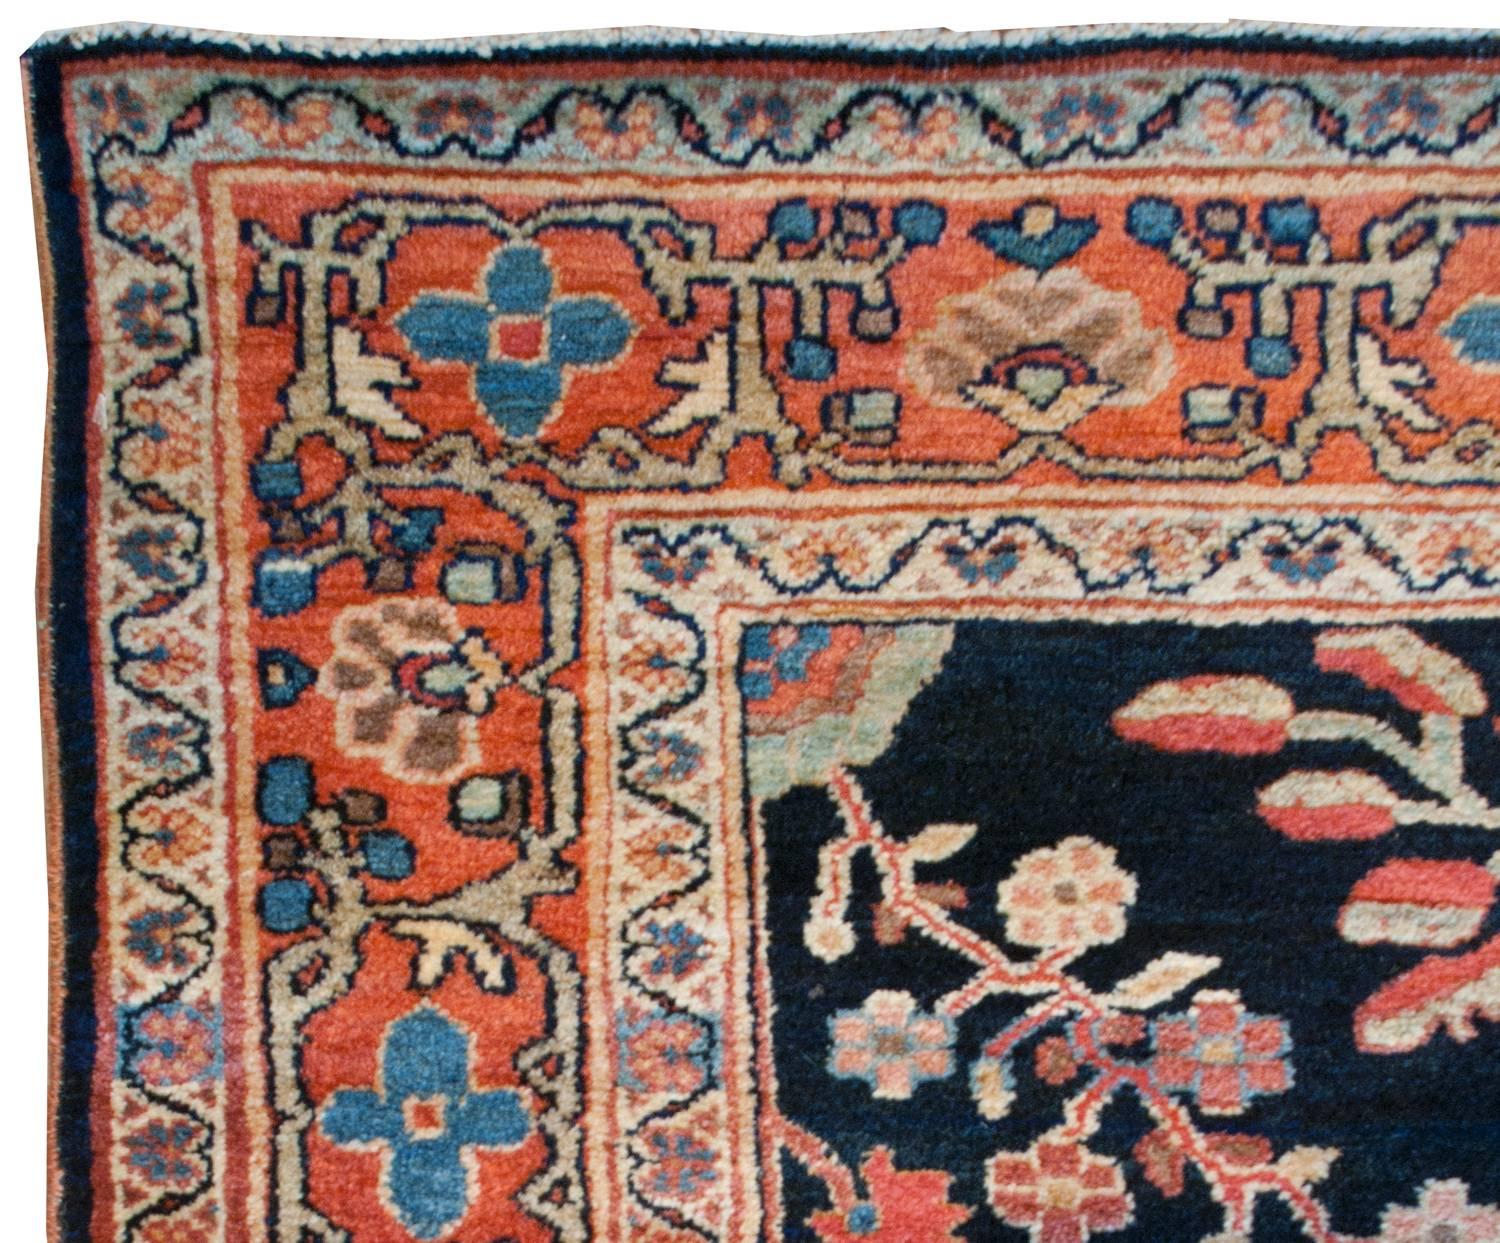 A unique early 20th century Persian Sarouk rug with an interesting English Arts & Crafts-inspired floral pattern with large multicolored, almost geometric-form, flowers on a dark indigo background. A central crimson medallion has stylized vines